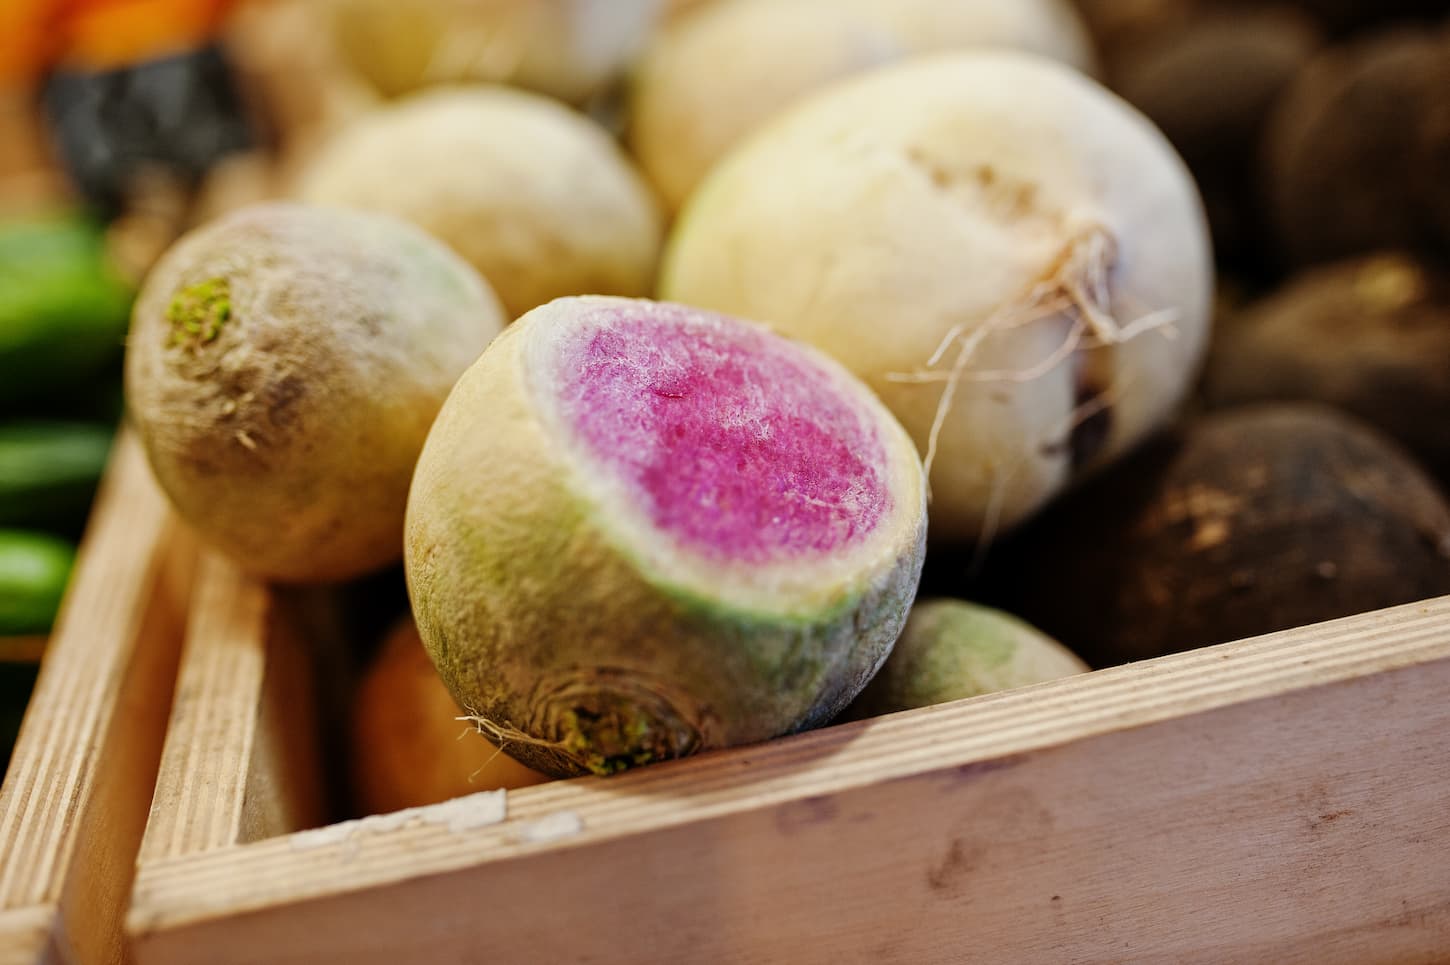 An image of colorful, shiny, and fresh turnips on the shelf of a supermarket or grocery store.